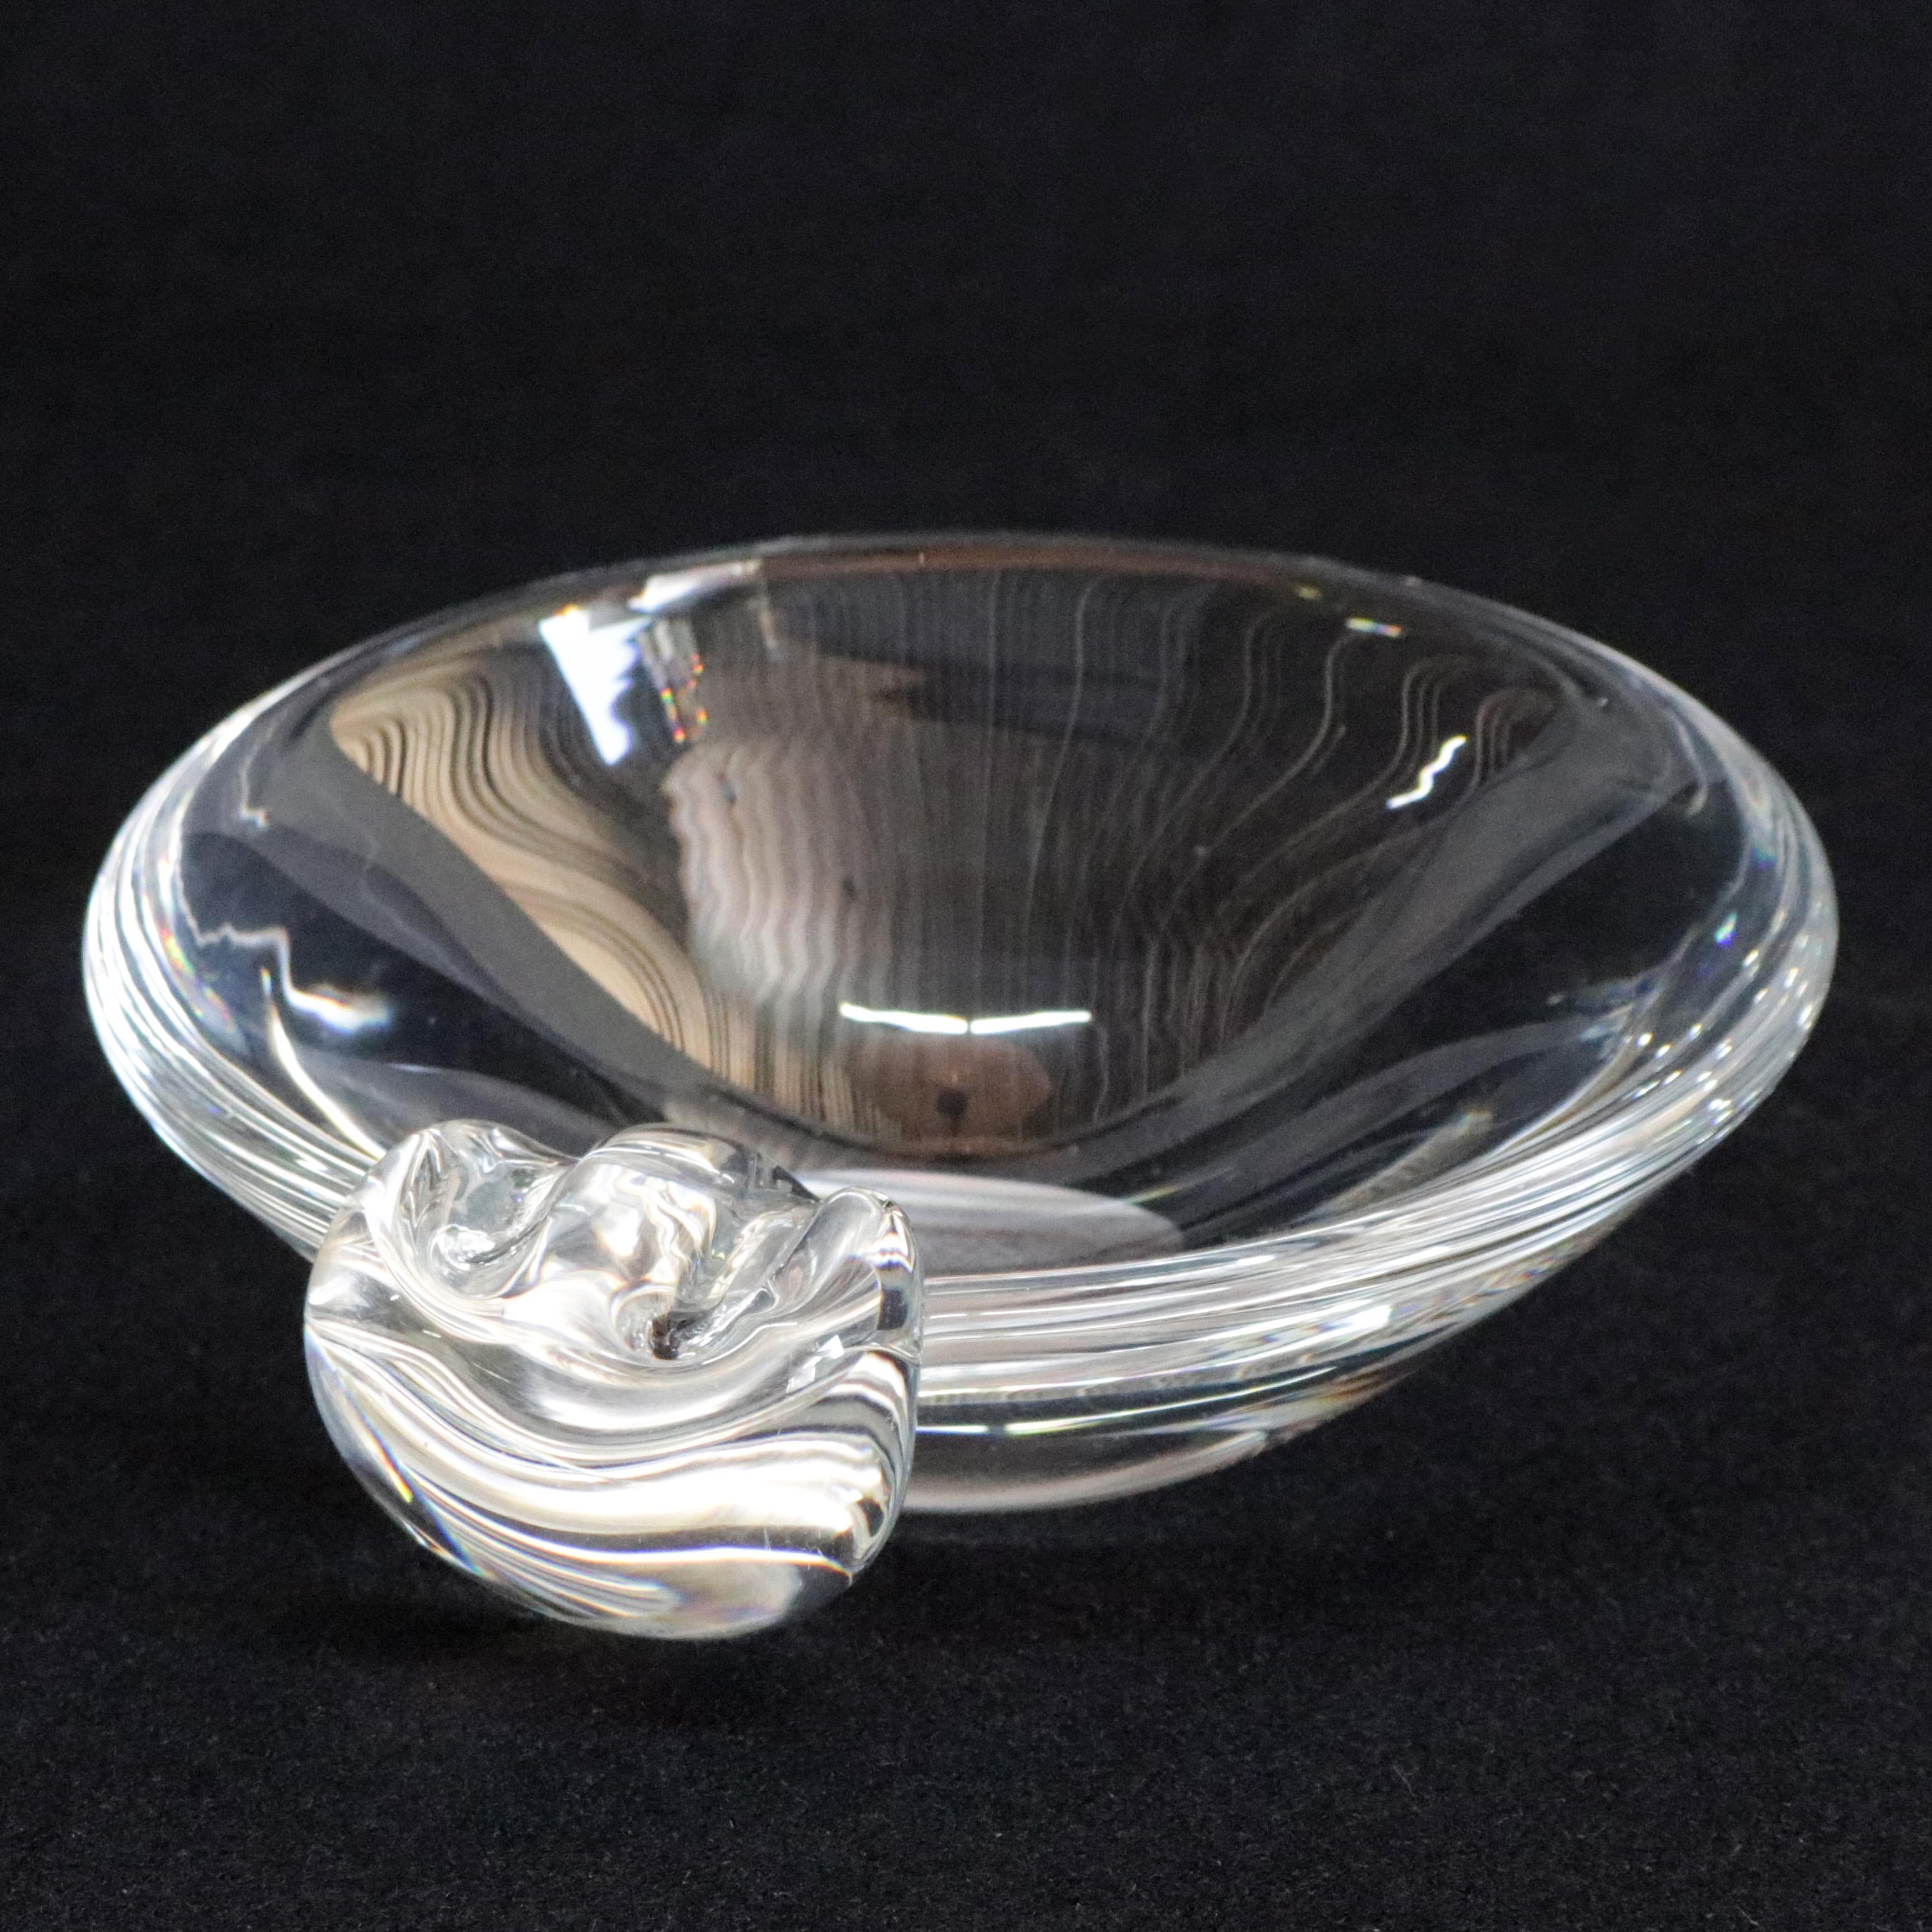 A set of three midcentury Steuben mouth blown crystal ashtrays feature colorless art glass in sloping bowl form designed in the 1940s and 1950s for corning museum of glass, New York, NY, signed on bases, 20th century.

Measure: 1.5